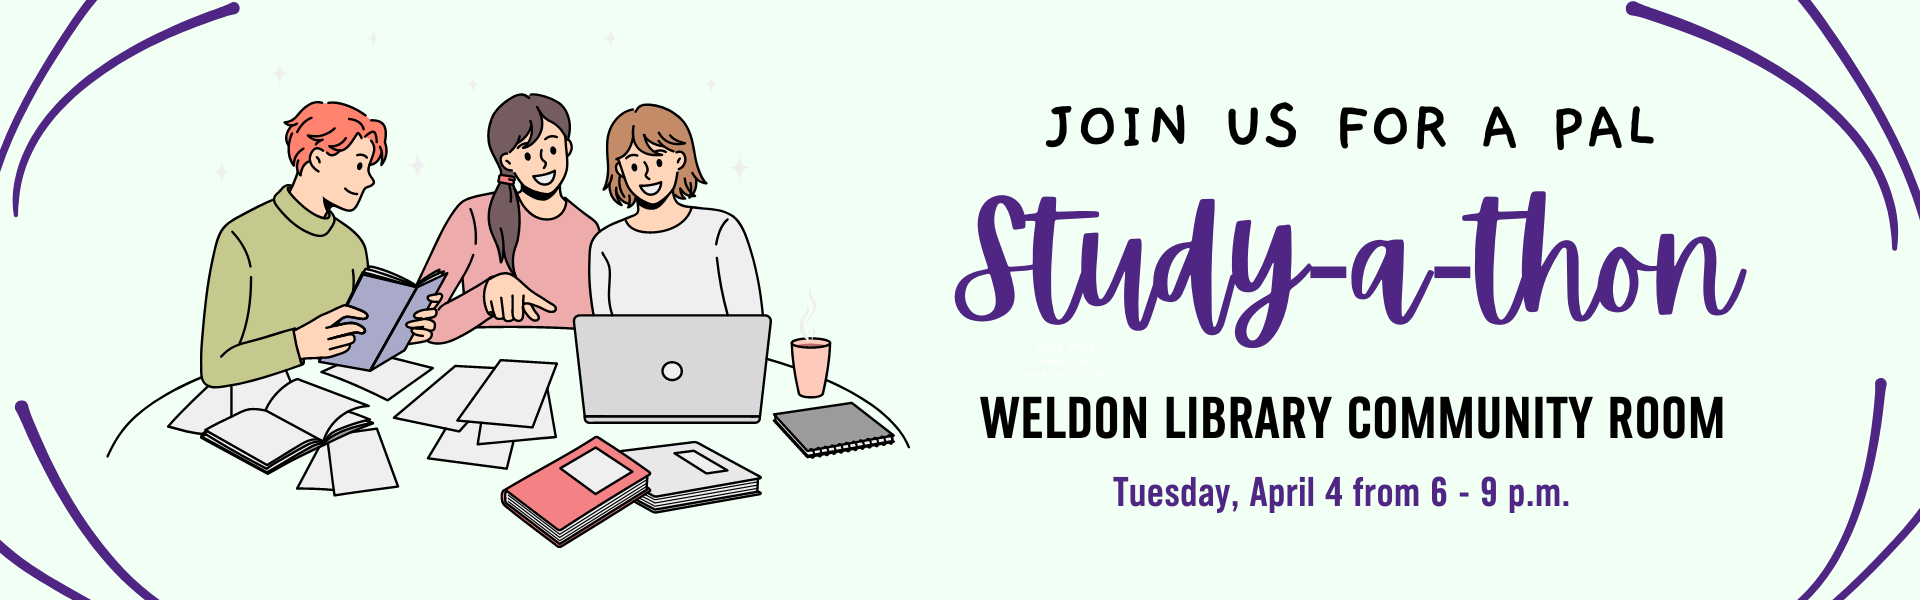 Green background with students studying together and text reading Join us for a PAL Study-a-thon in the Weldon Library Community Room on Tuesday, April 4 from 6-9pm.